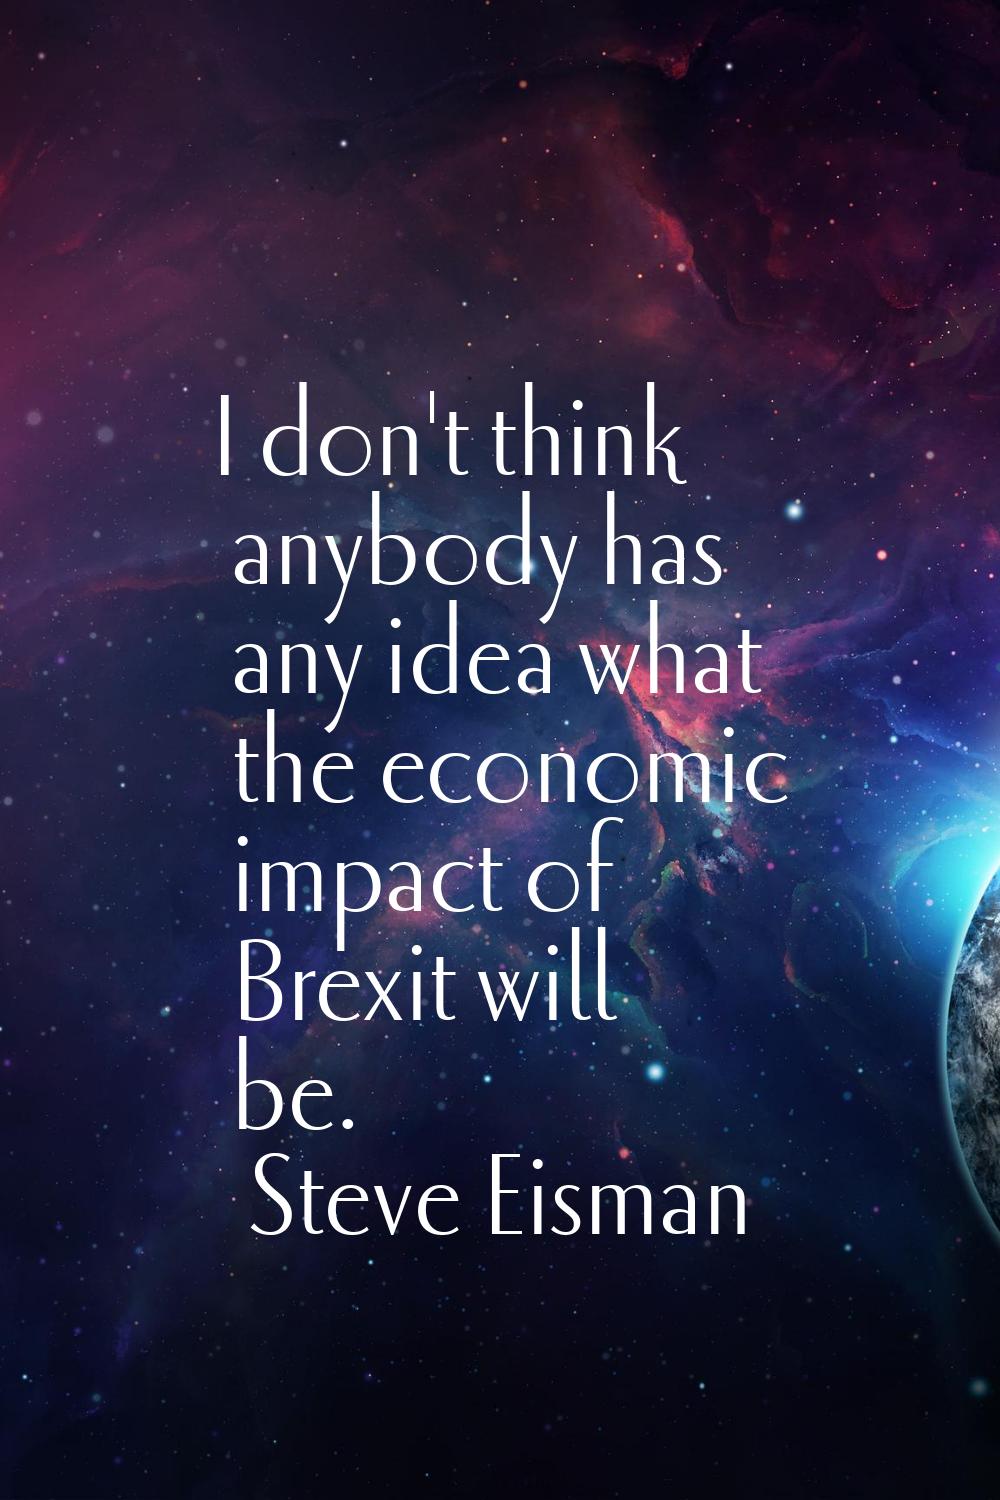 I don't think anybody has any idea what the economic impact of Brexit will be.